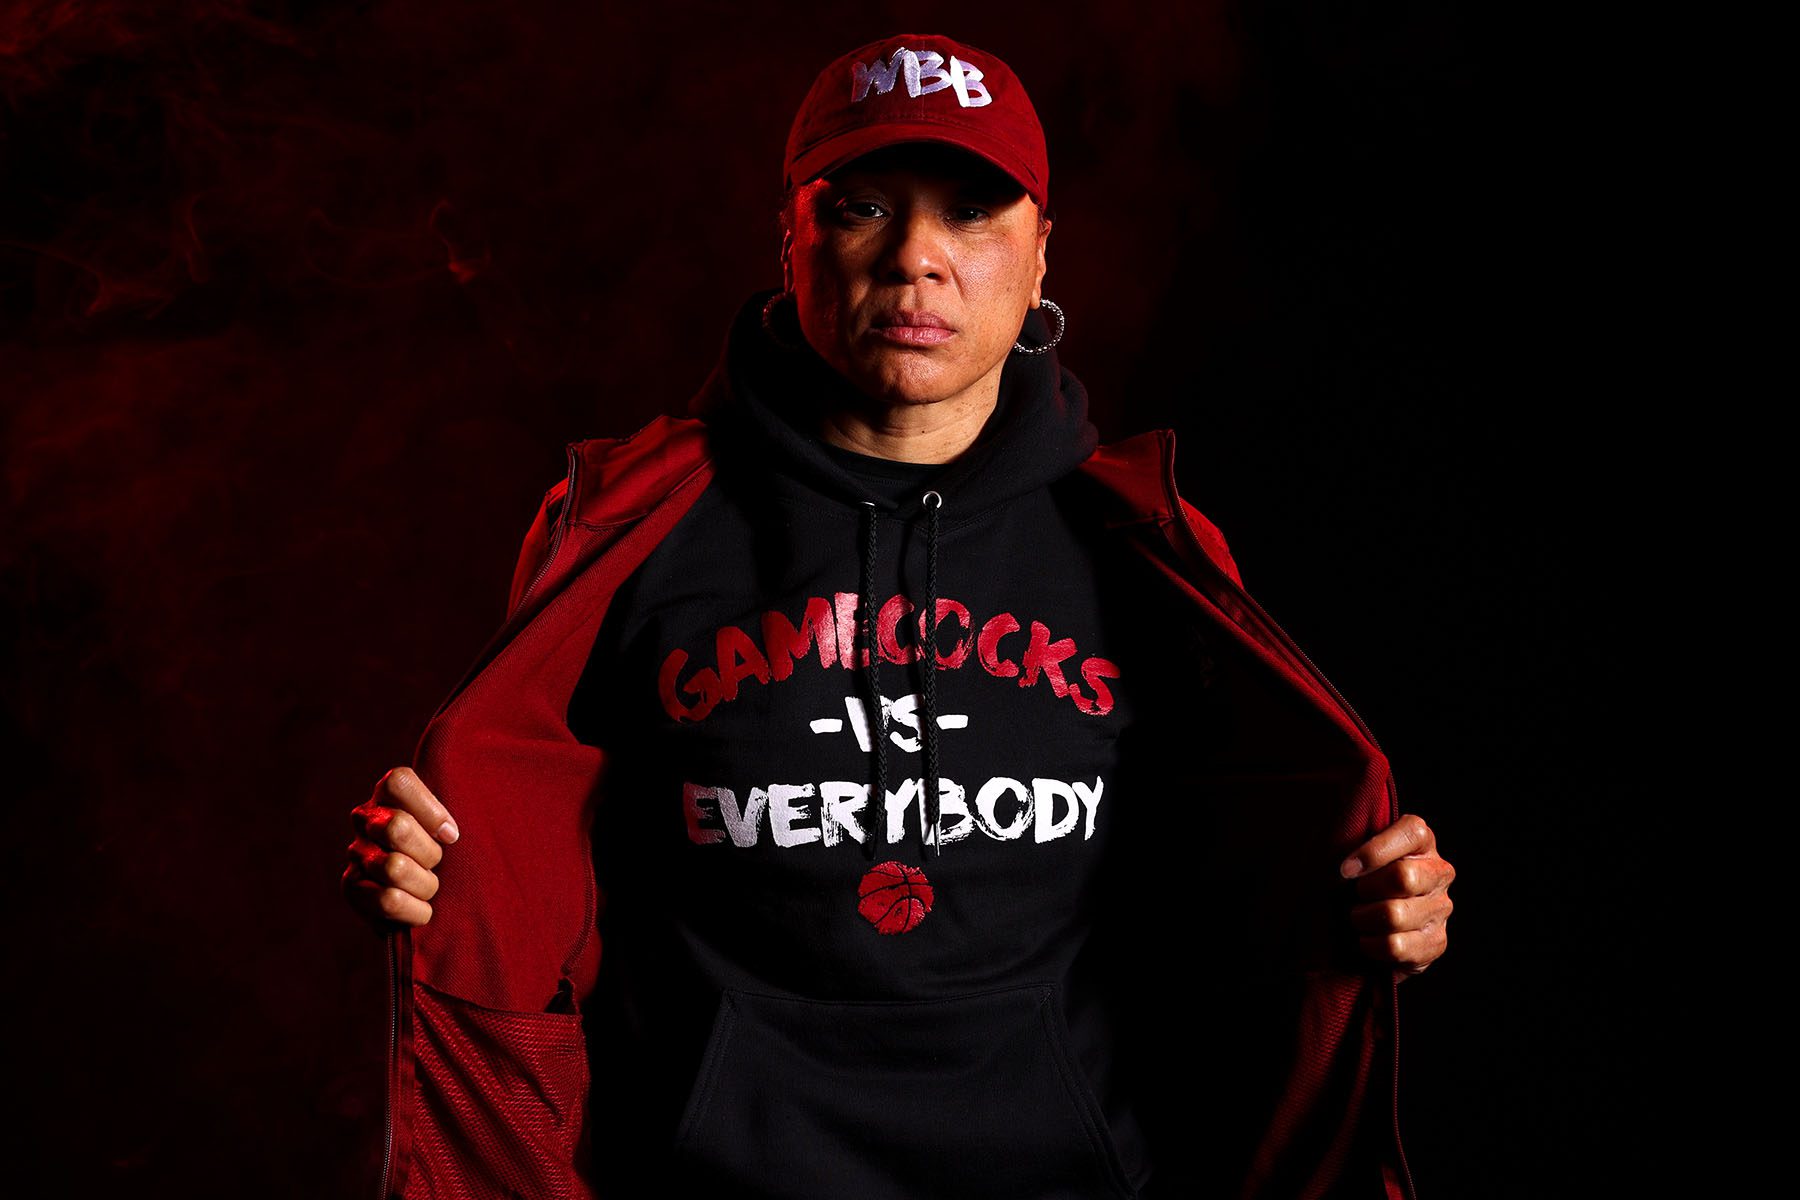 Dawn Staley shows off her hoodie which reads "Gamecocks vs. Everybody"